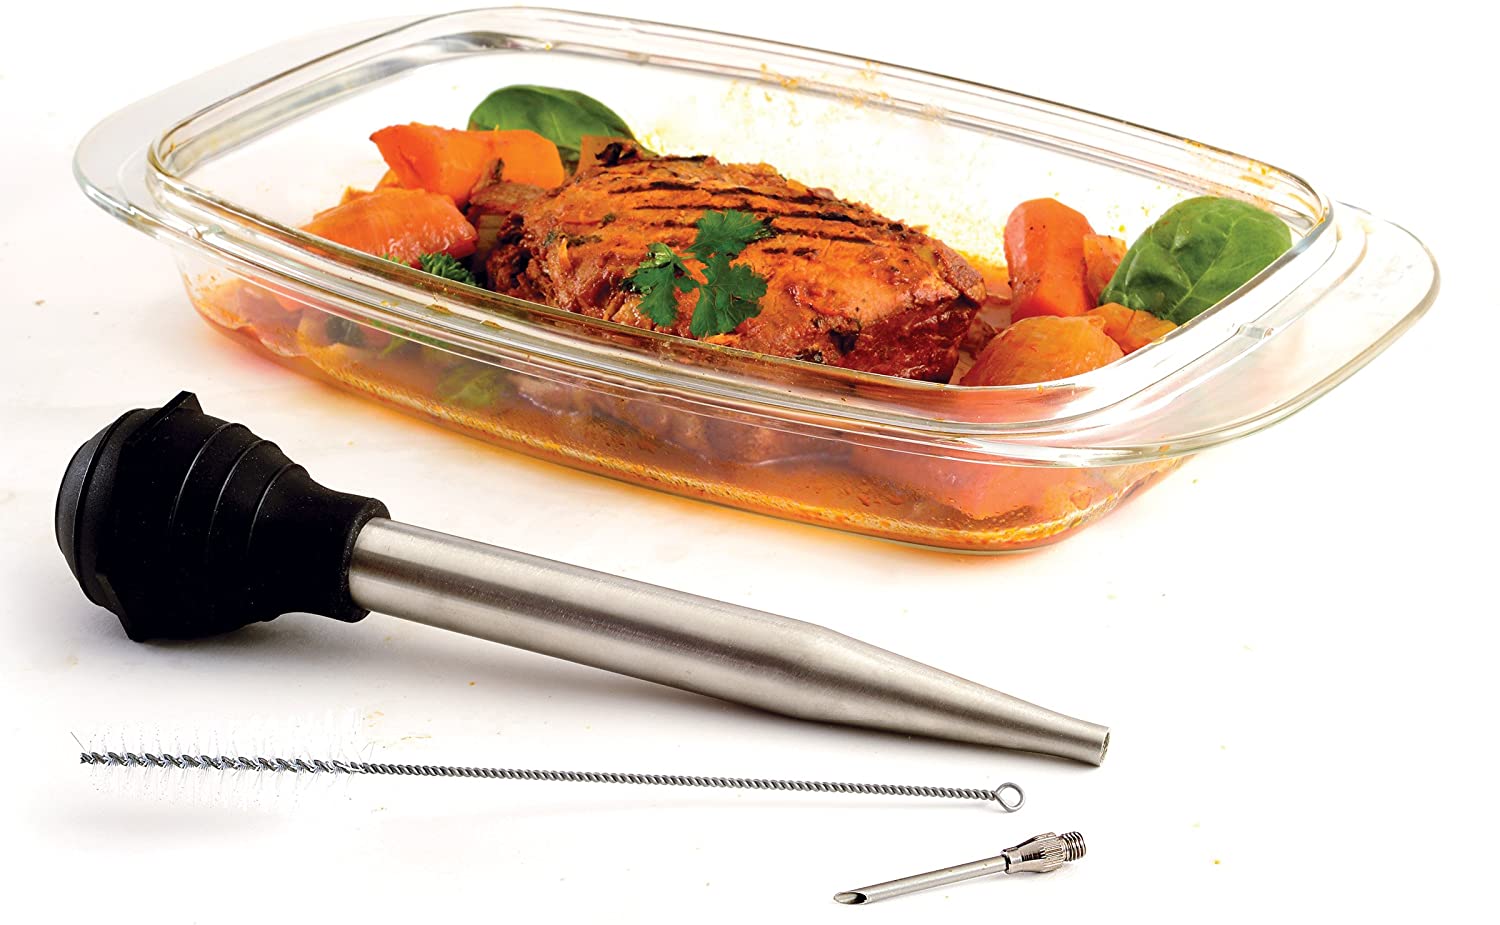 Norpro - Deluxe Stainless Steel Baster with Injector and Cleaning Brush